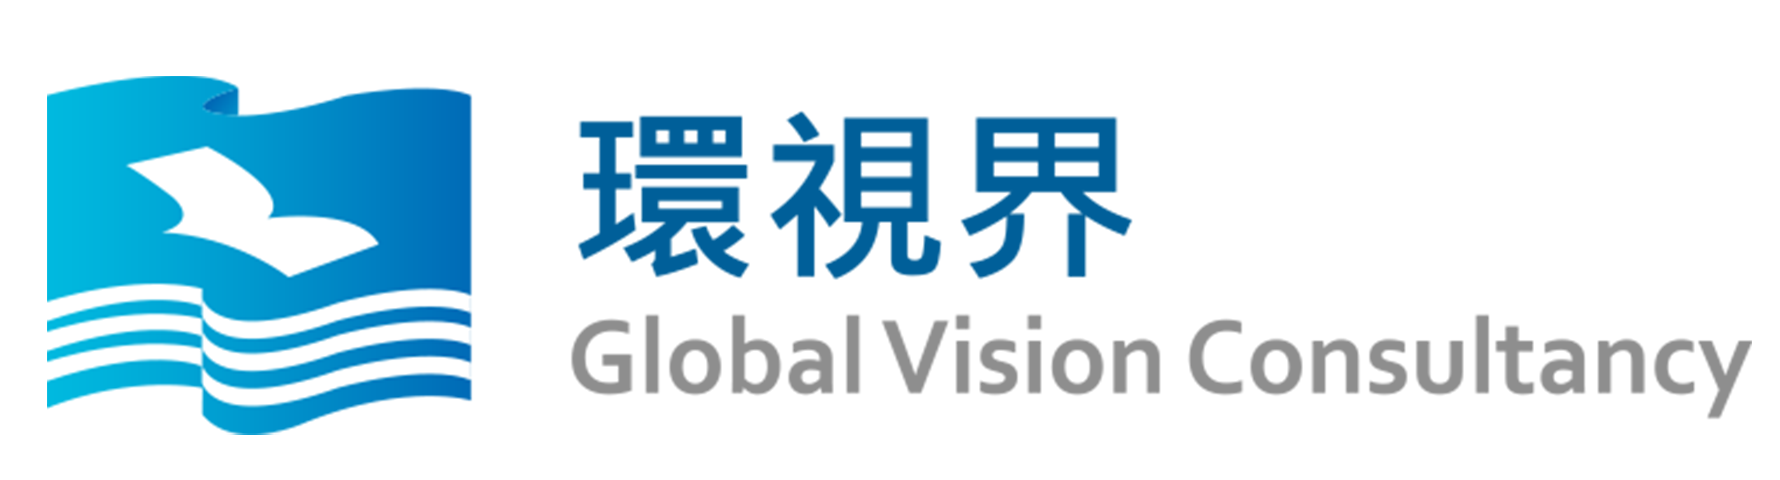 Global Vision Consultancy